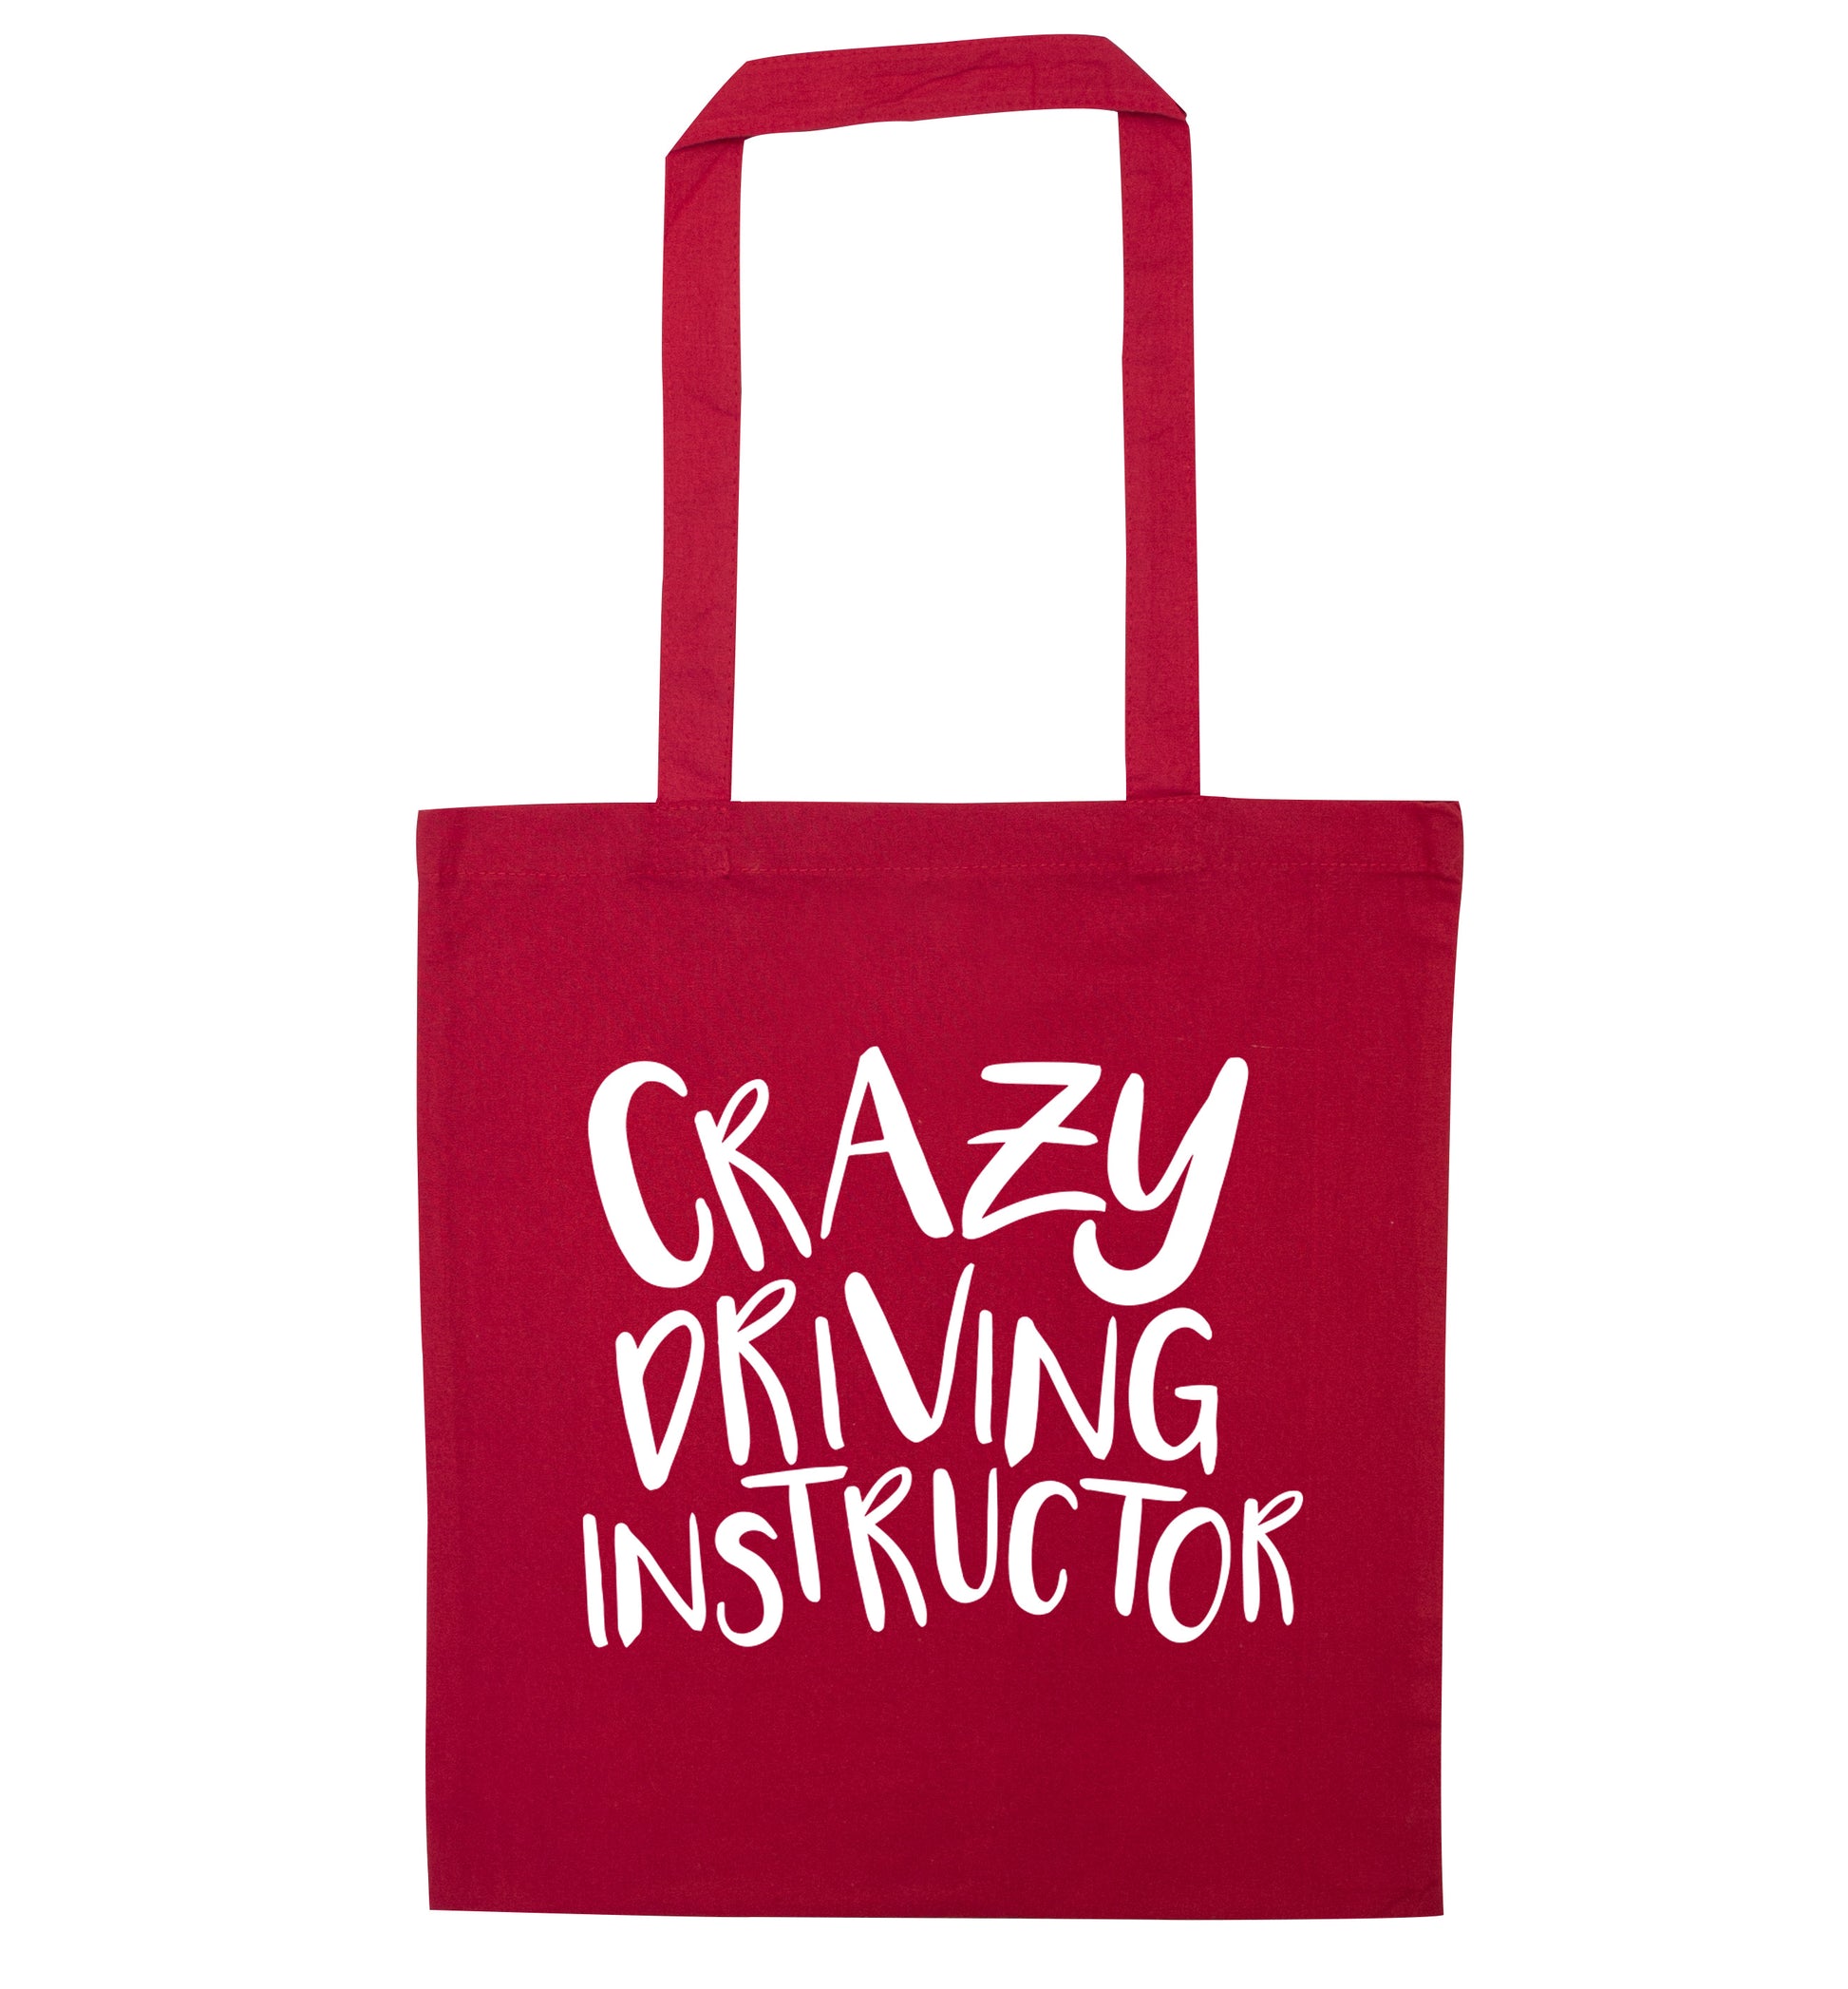 Crazy driving instructor red tote bag